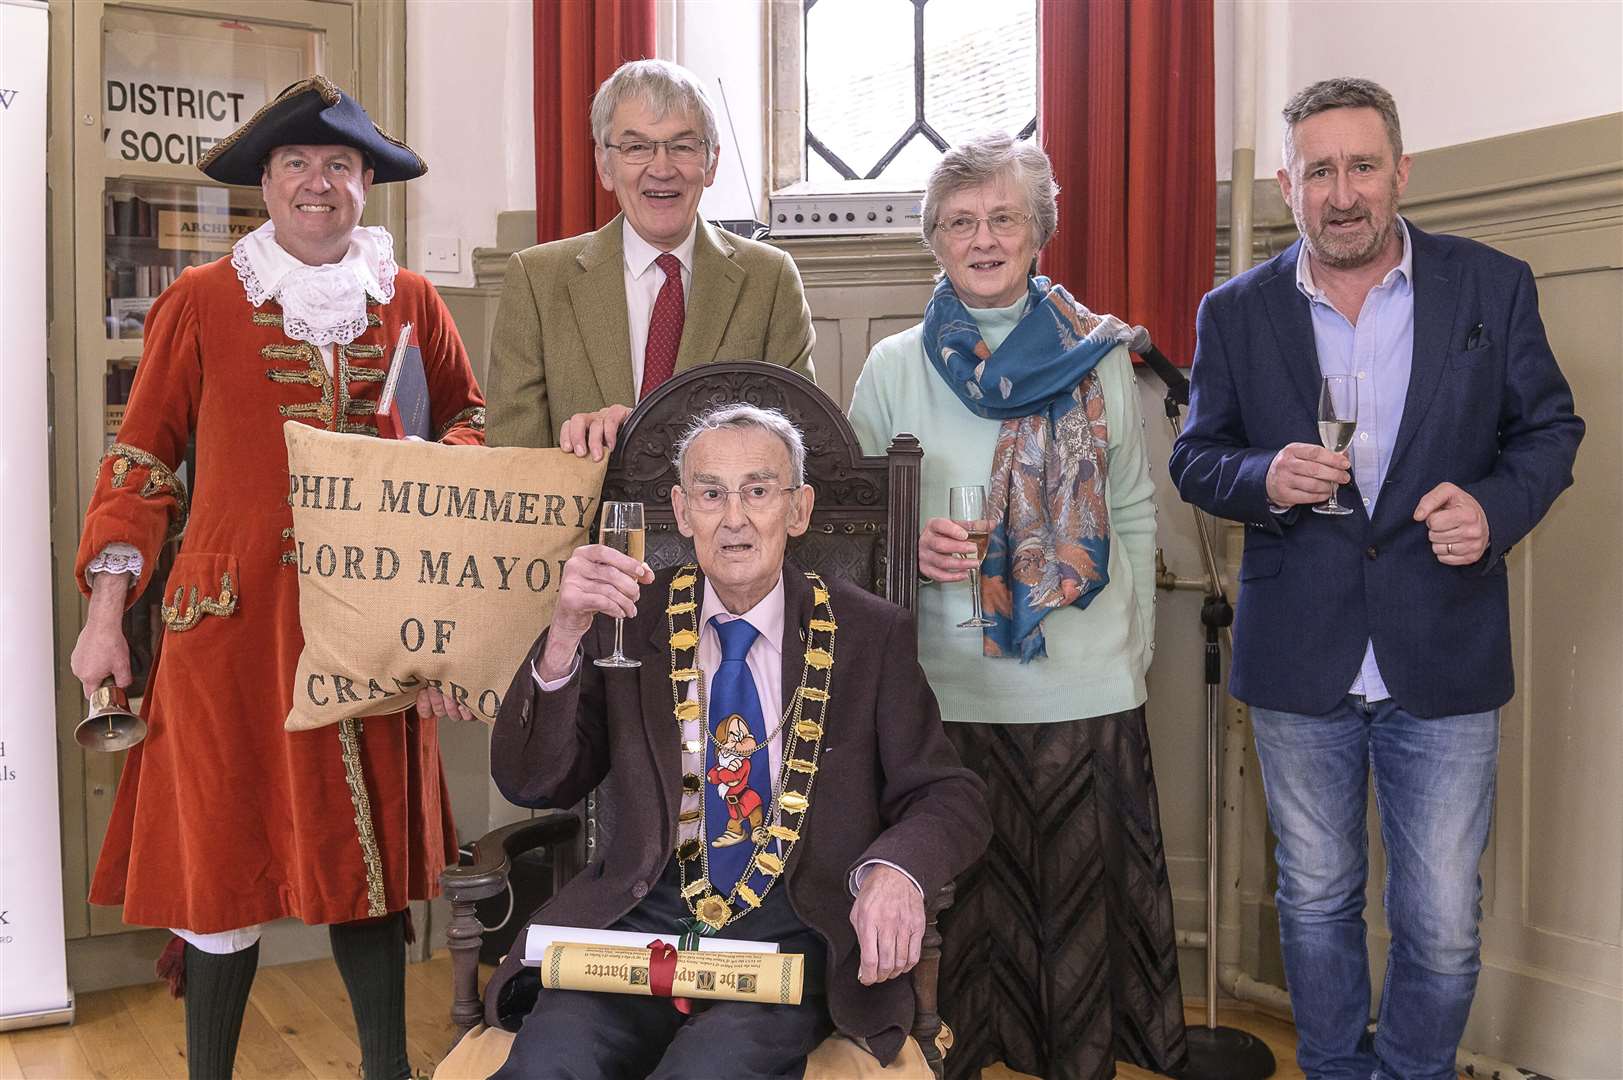 Phil Mummery, seated, at his Mayor-making ceremony with Town Crier Andy Fairweather, parish council chairman Kim Fletcher, wife Val Mummery and friend Stuart Cleary